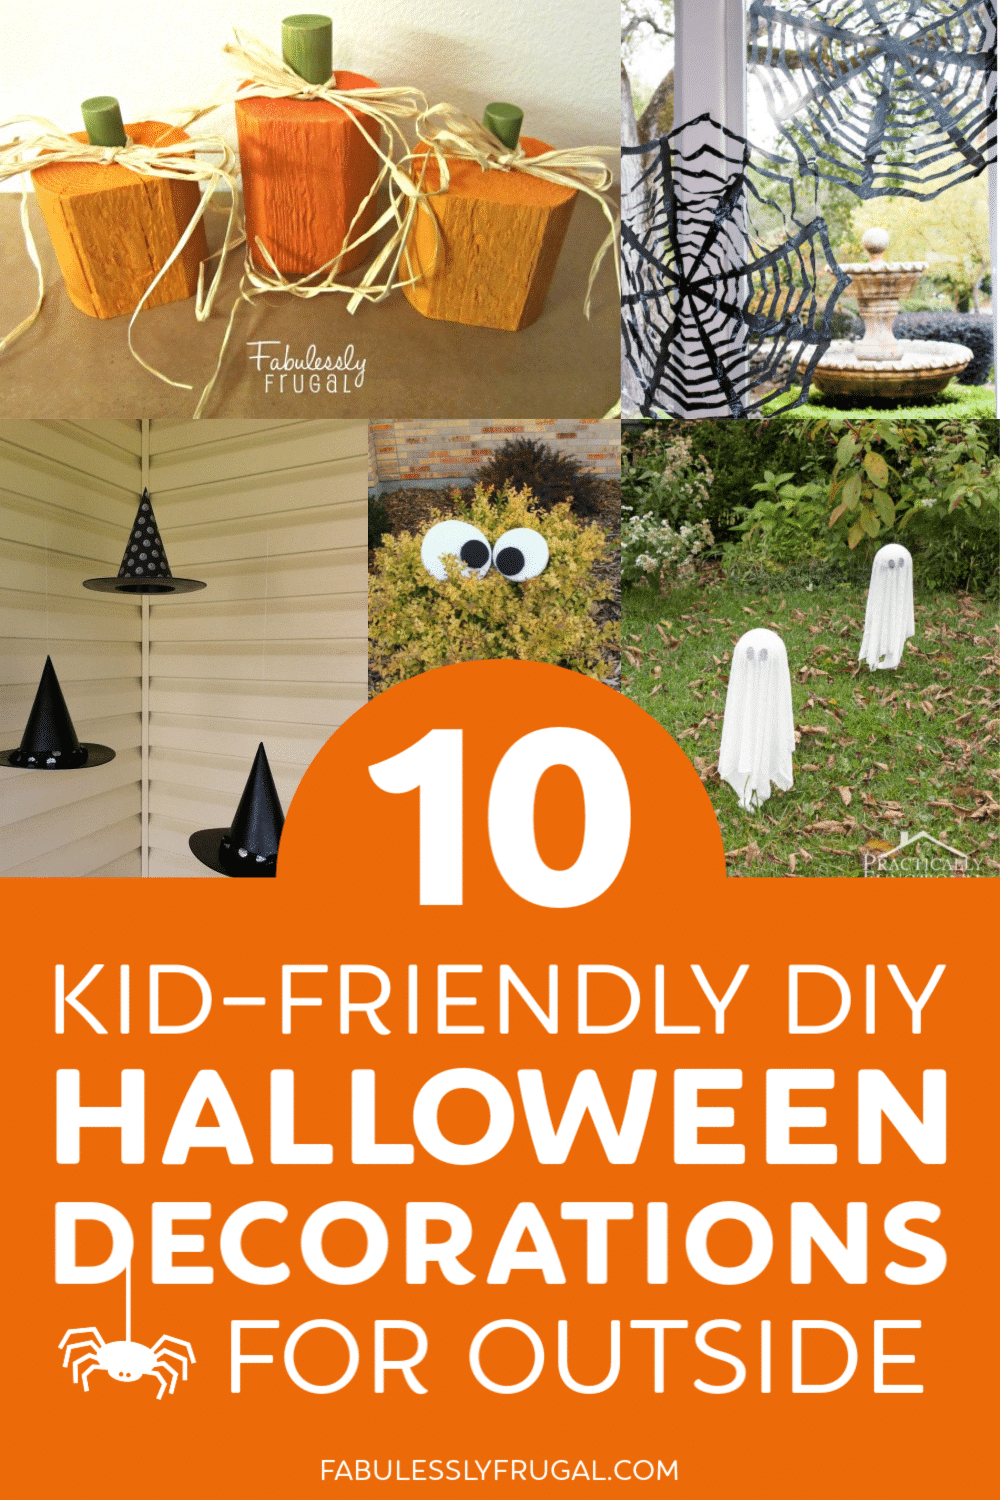 Kid-friendly DIY Halloween decorations for outside